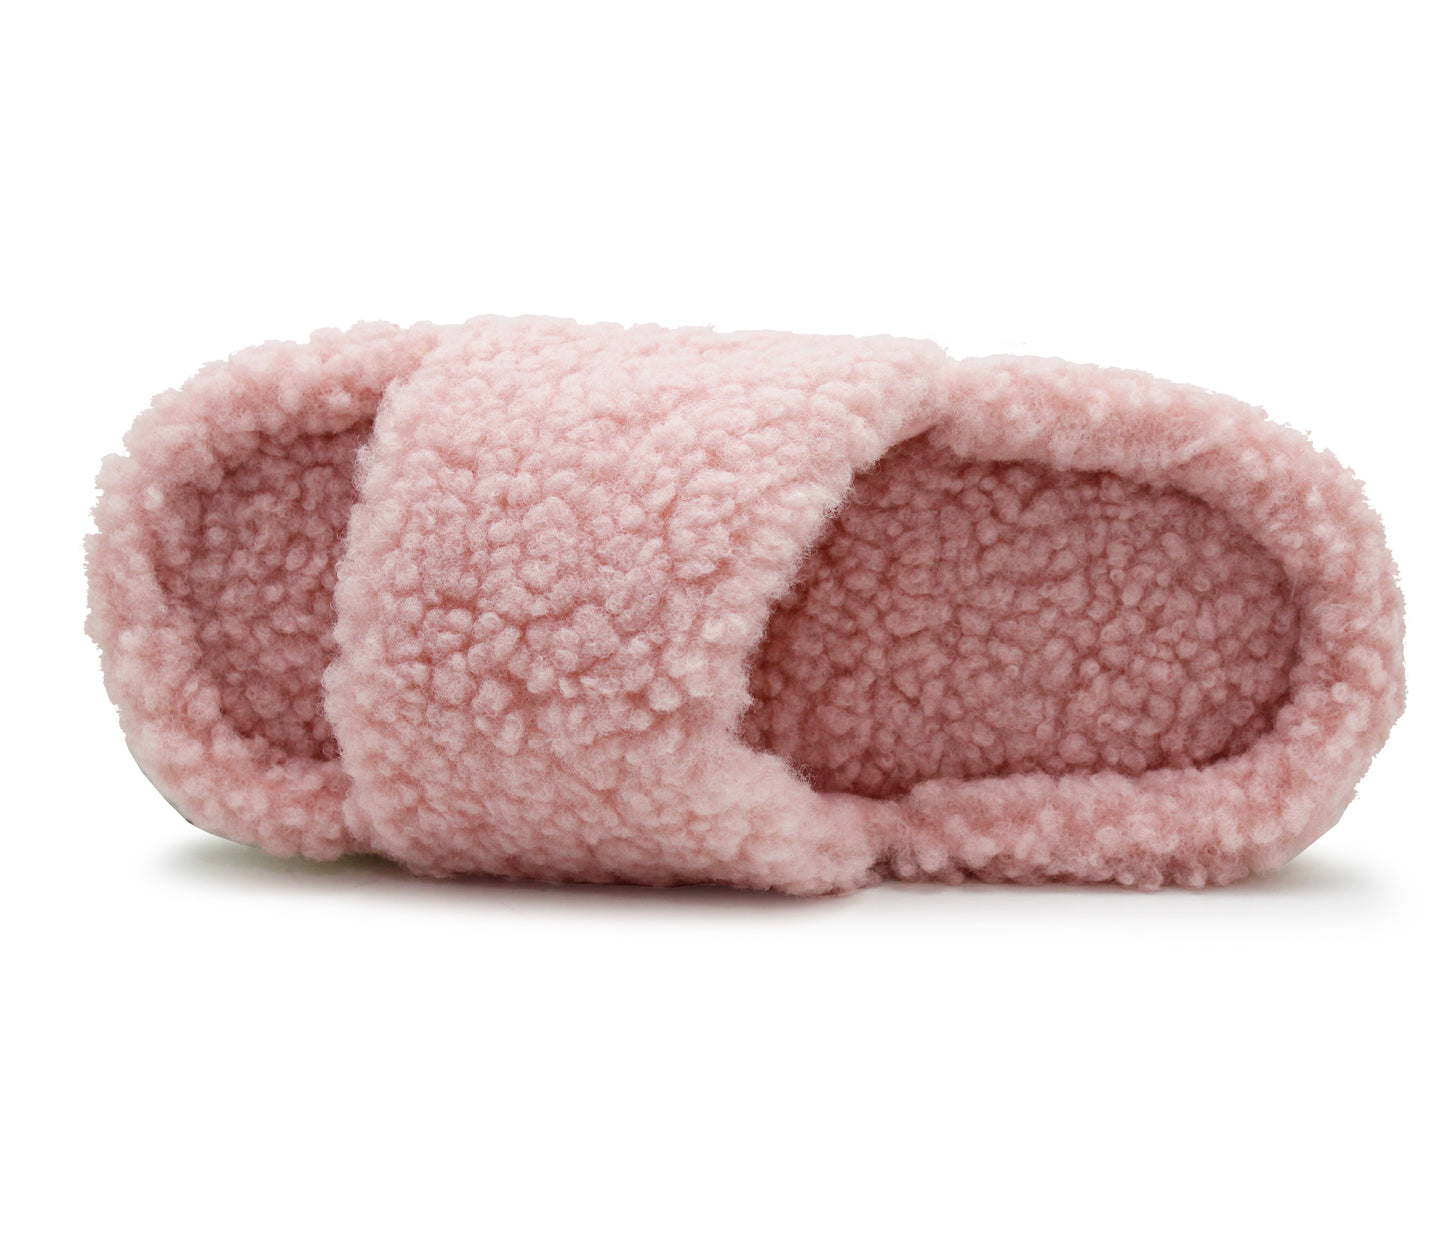 Womens Slip On Pink Fleece Sliders Warm Cosy Indoor House Shoes Backless Mule Slippers